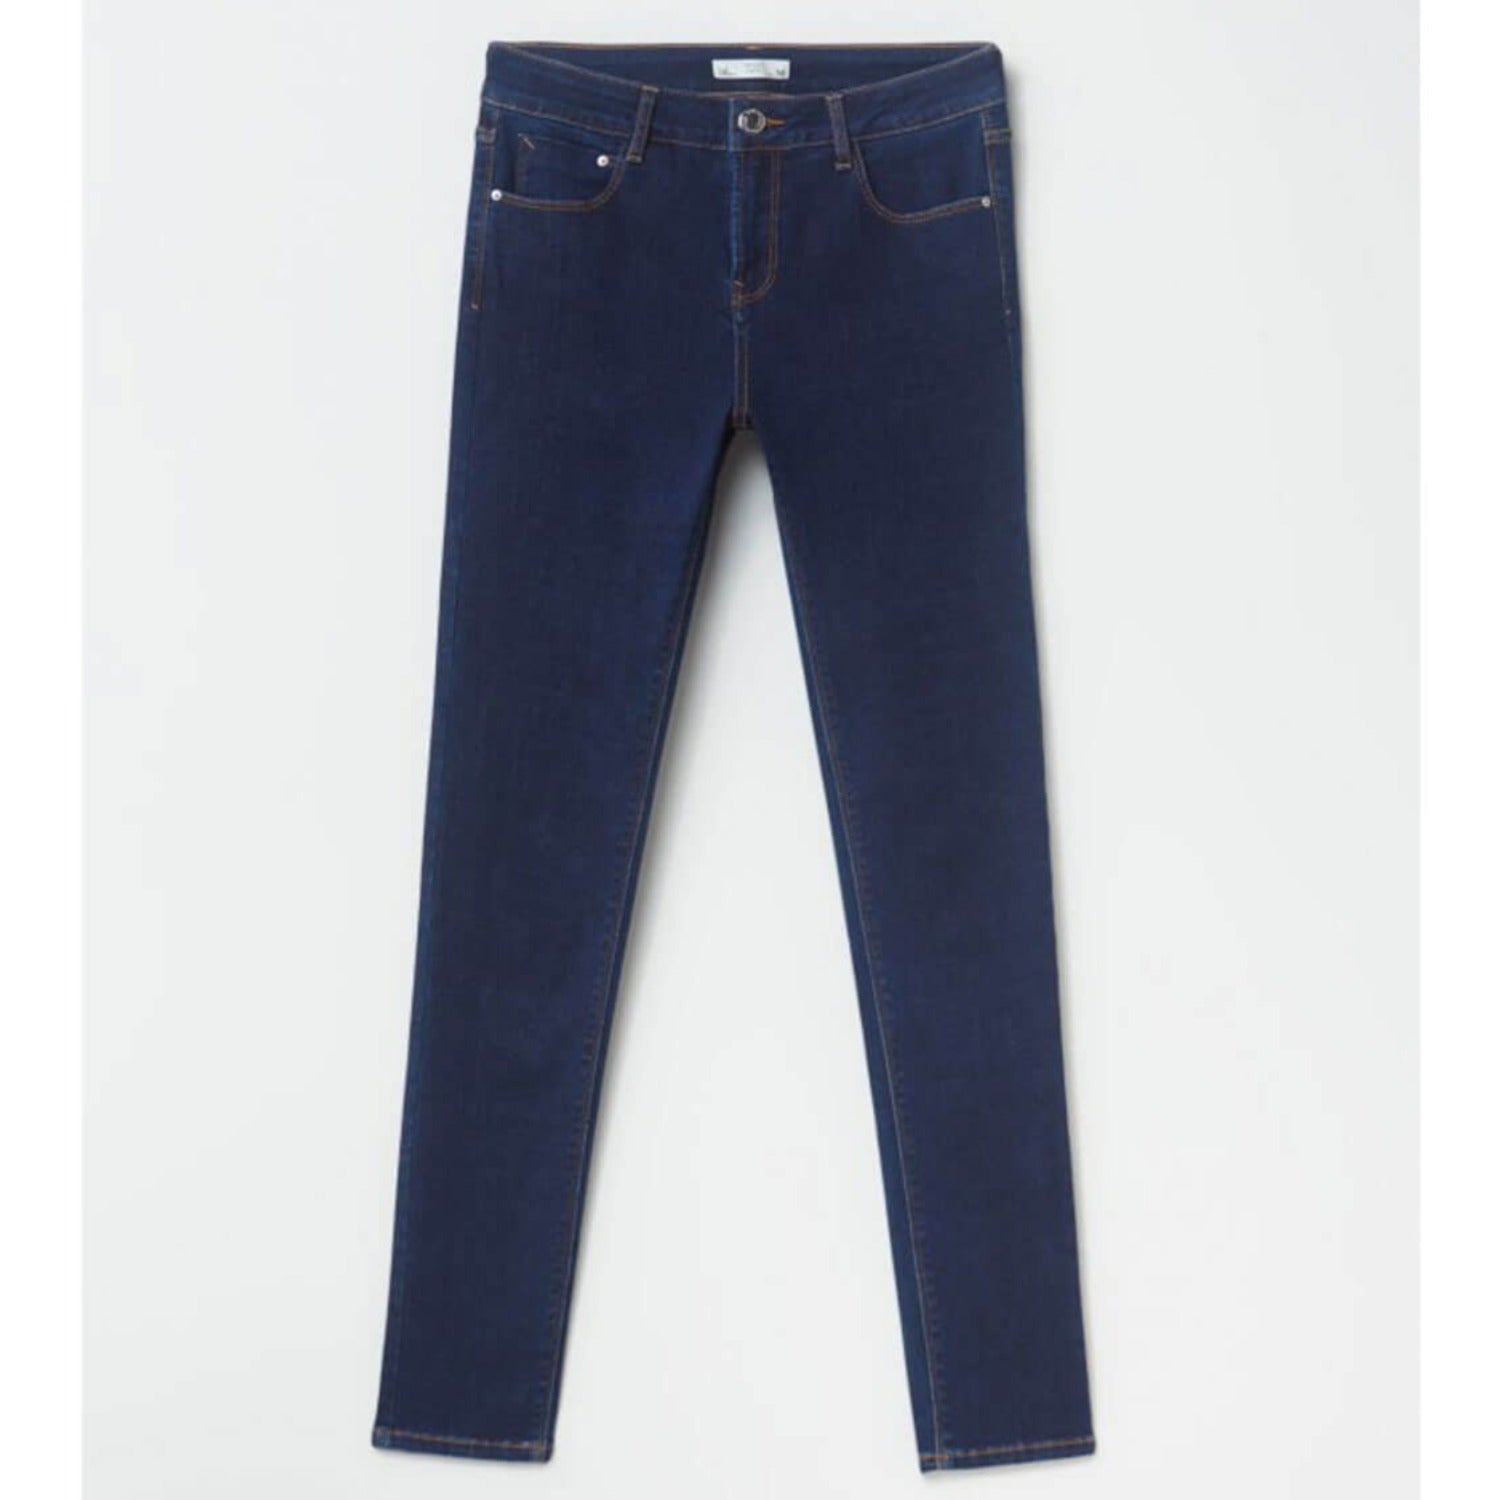 Sfera Skinny Jeans - Rinse 1 Shaws Department Stores